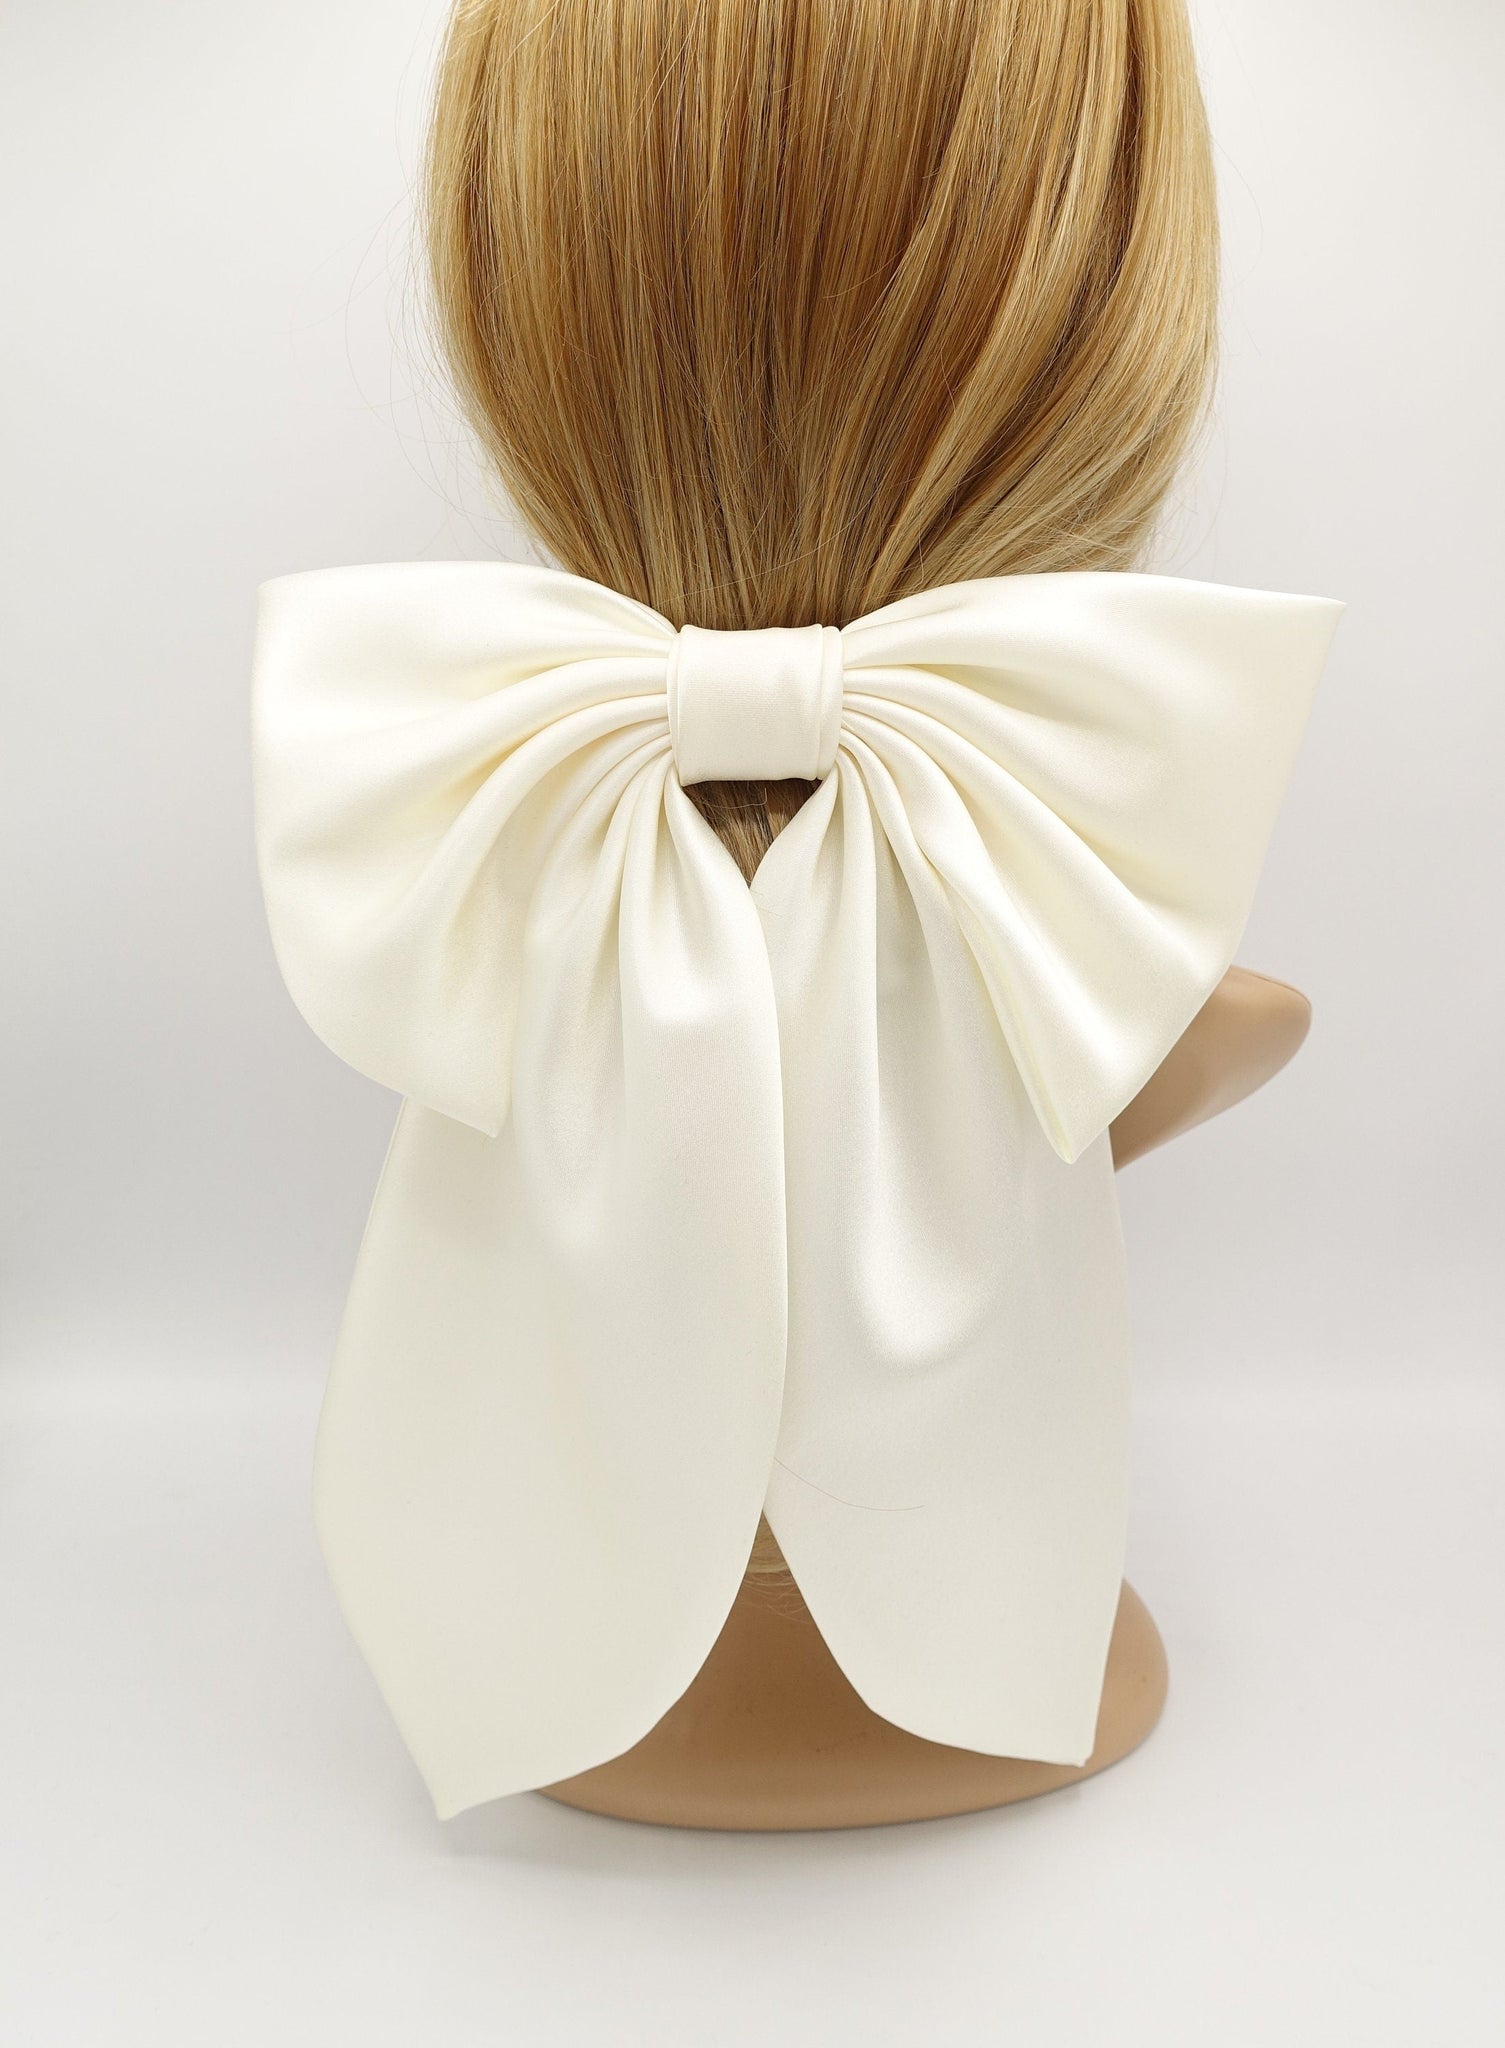 veryshine.com Barrette (Bow) plus grand satin hair bow long tail large hair accessory for women